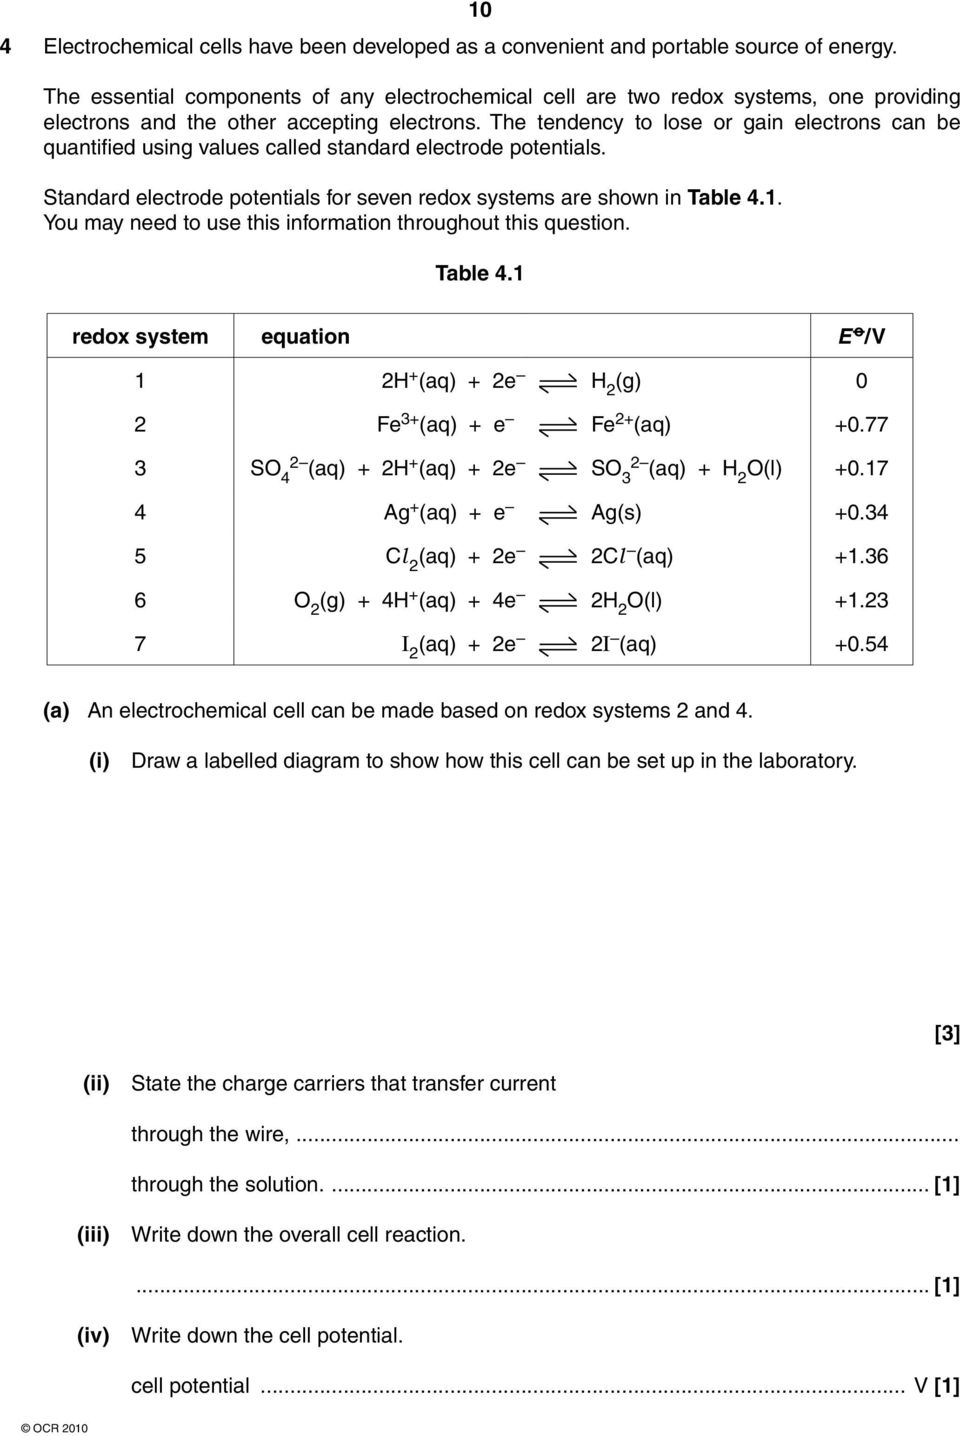 The tendency to lose or gain electrons can be quantified using values called standard electrode potentials. Standard electrode potentials for seven redox systems are shown in Table 4.1.